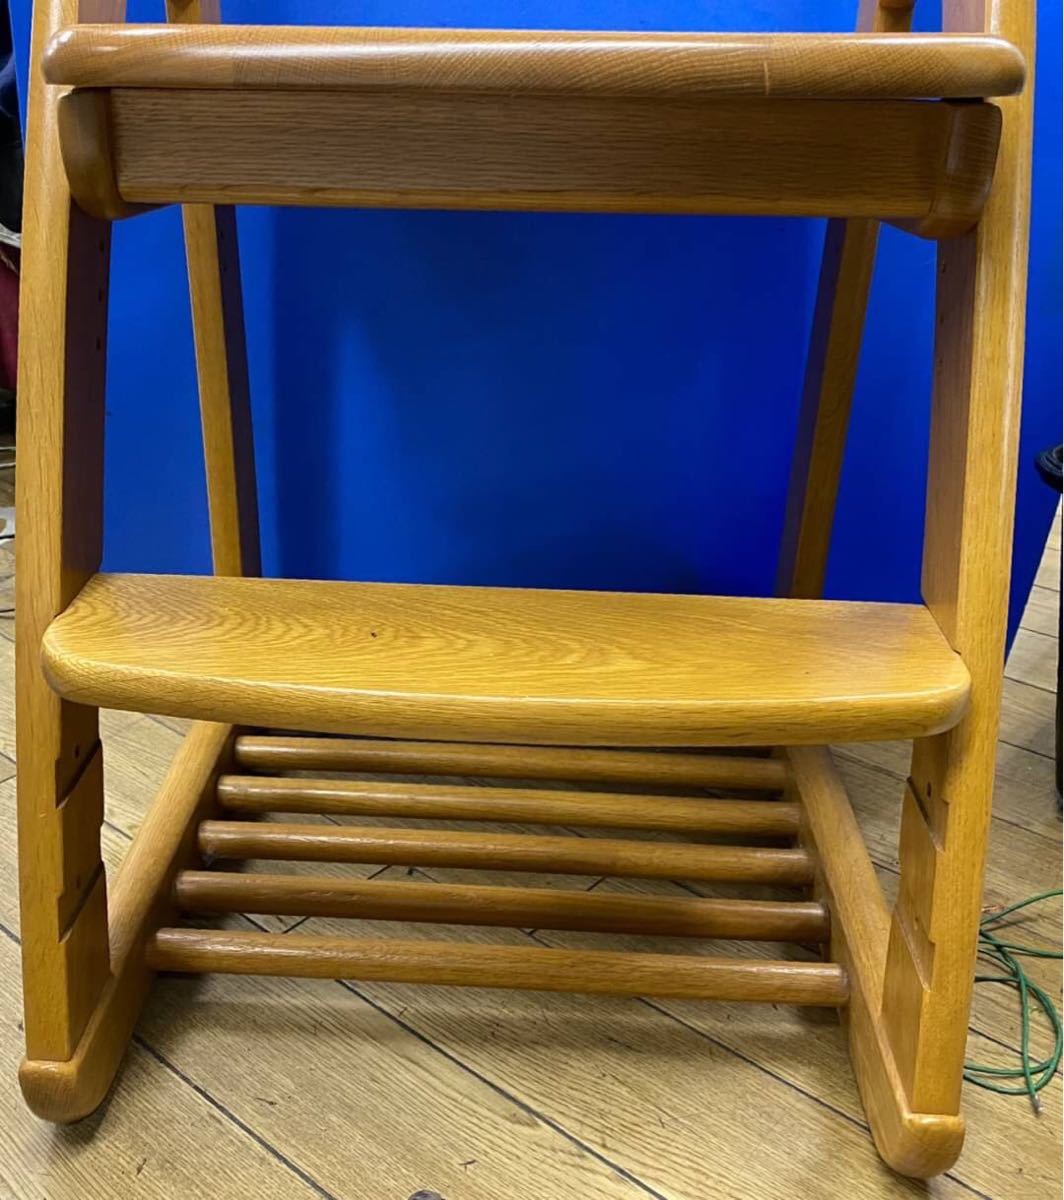 0C8091 wooden high chair baby chair 0